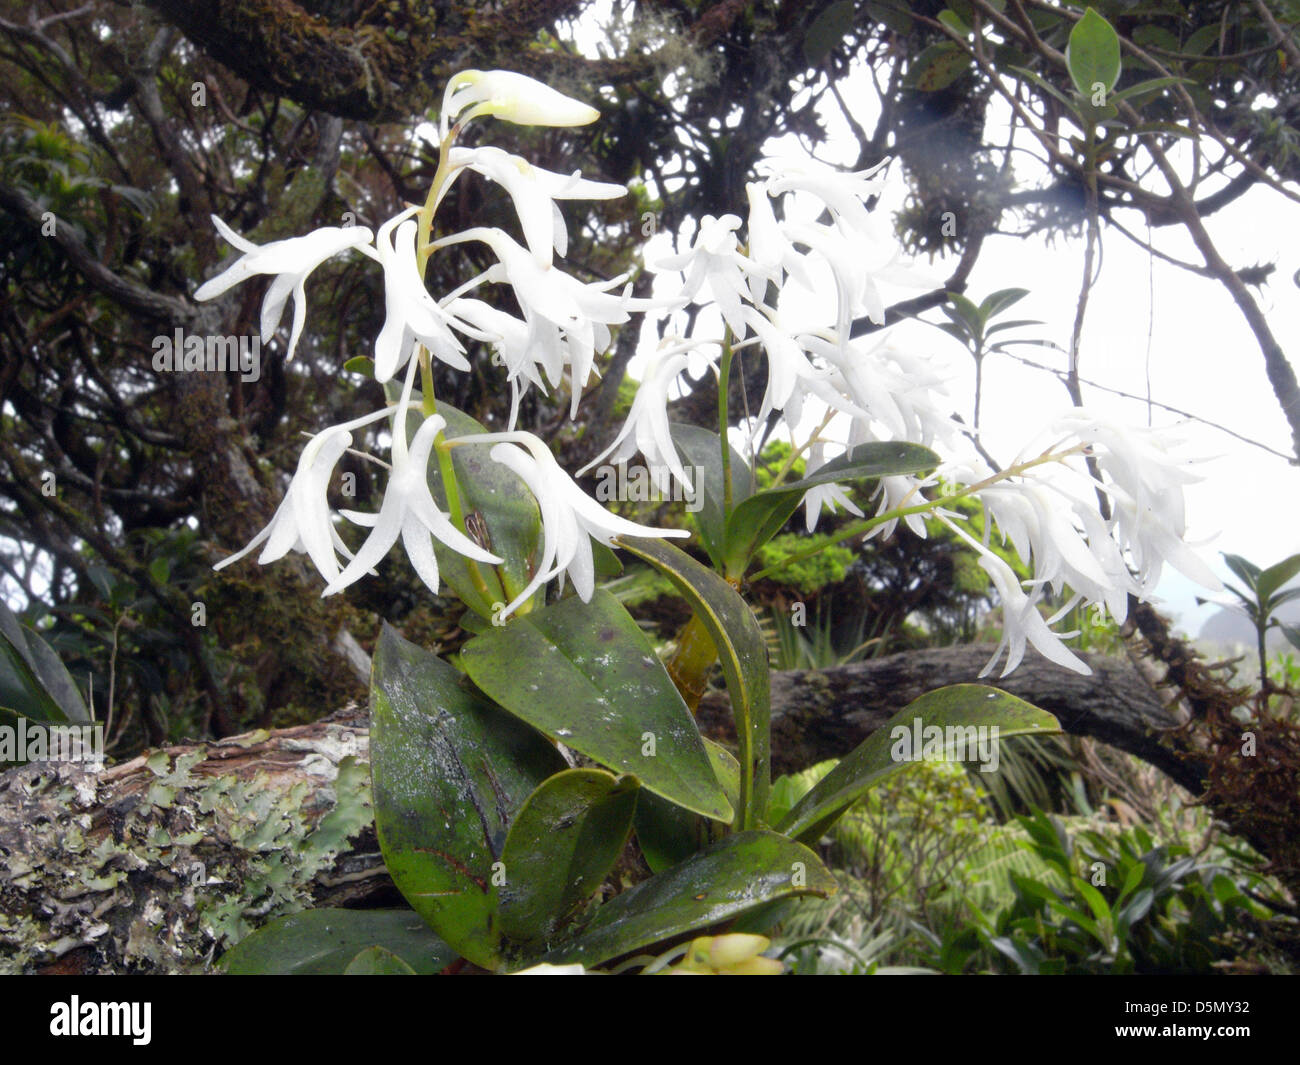 Dendrobium moorei, an orchid endemic to the cloud forests on the mountains of Lord Howe Island, Australia Stock Photo